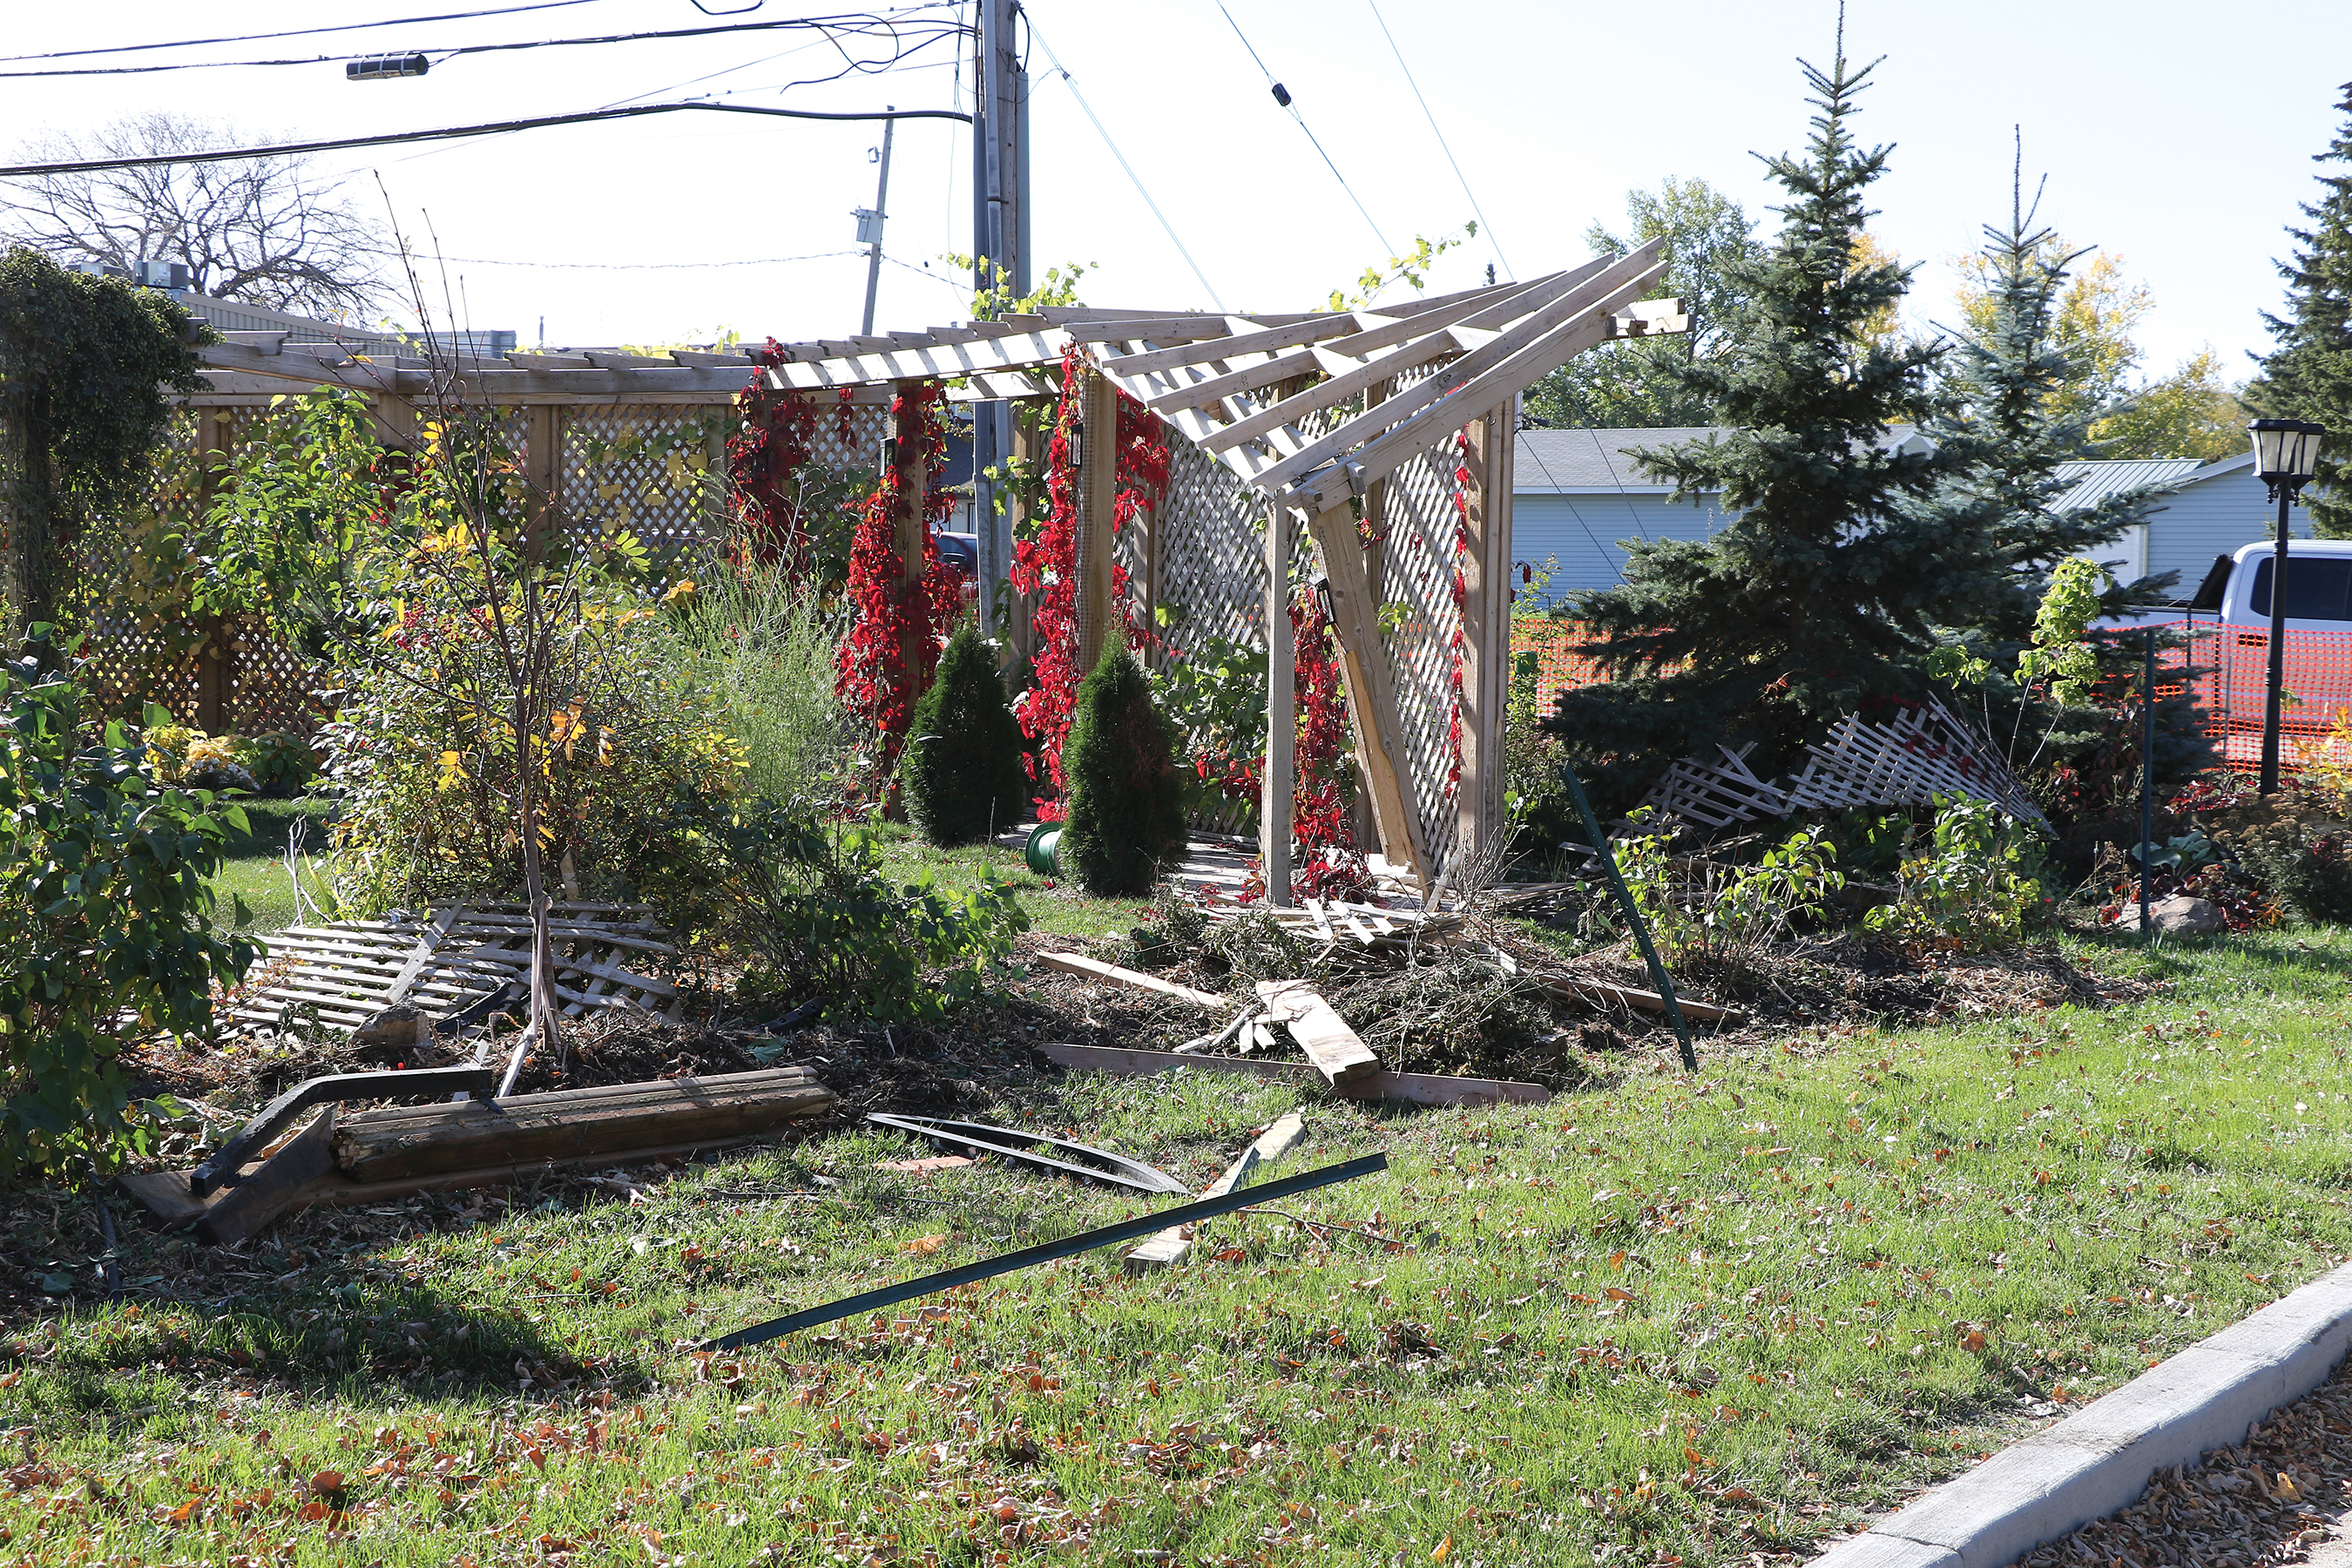 Damage allegedly done by Don Bleau of Moosomin on September 29.